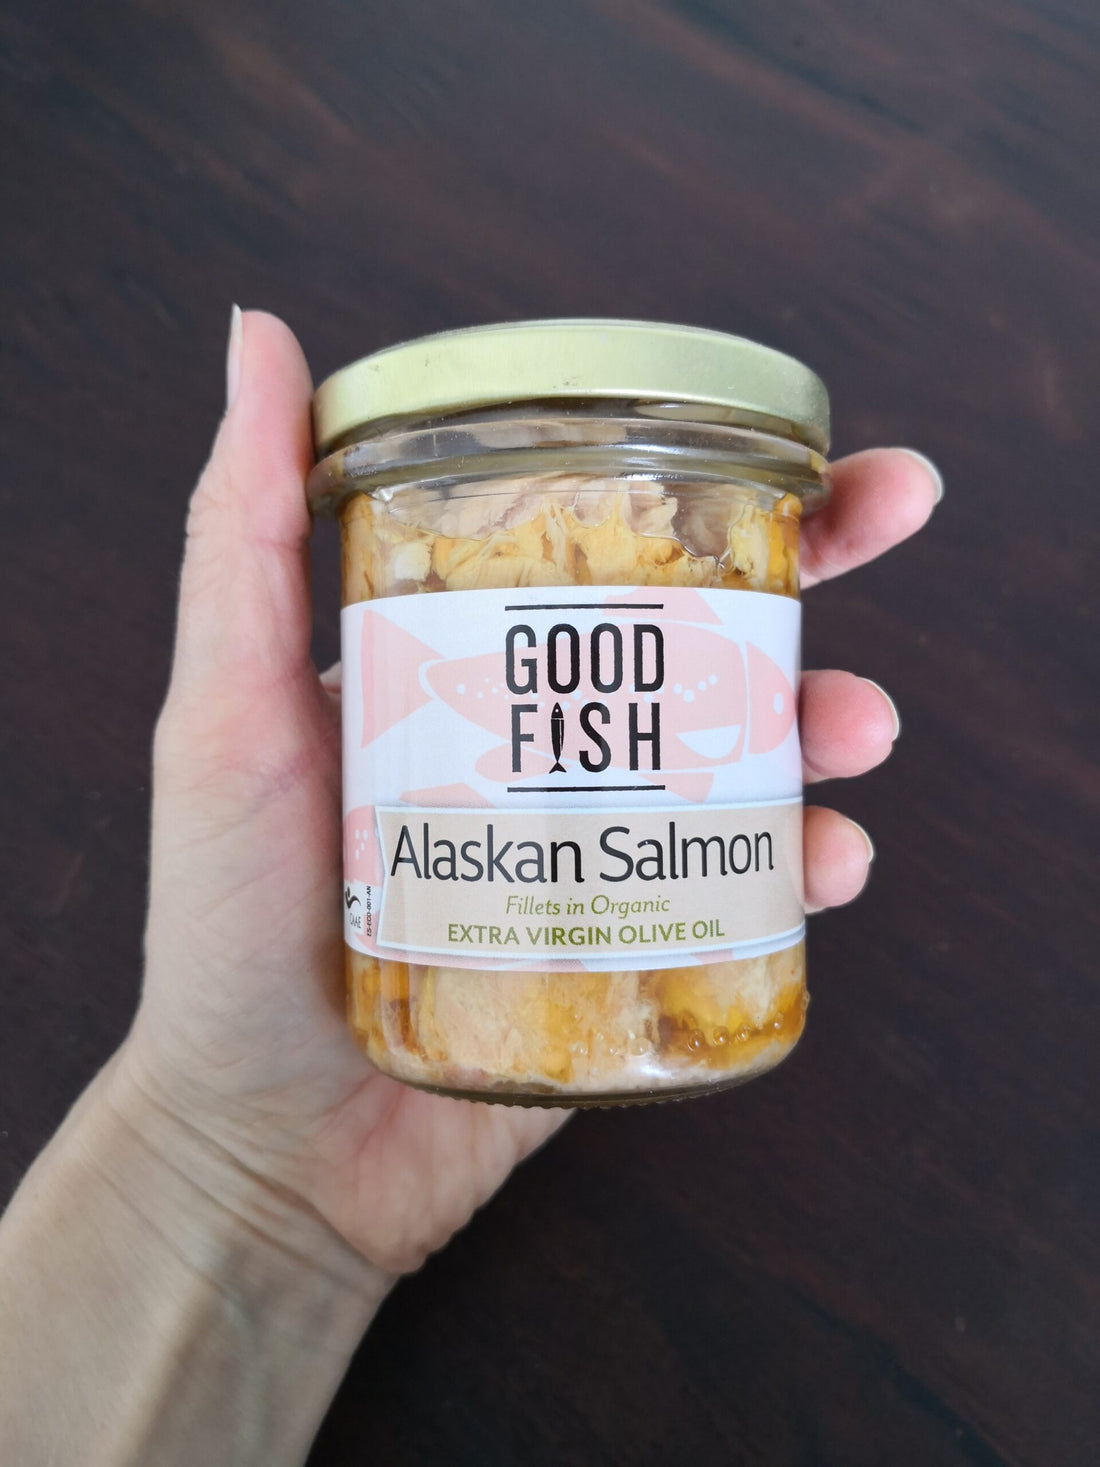 Introducing Good Fish: Sustainable, healthy fish